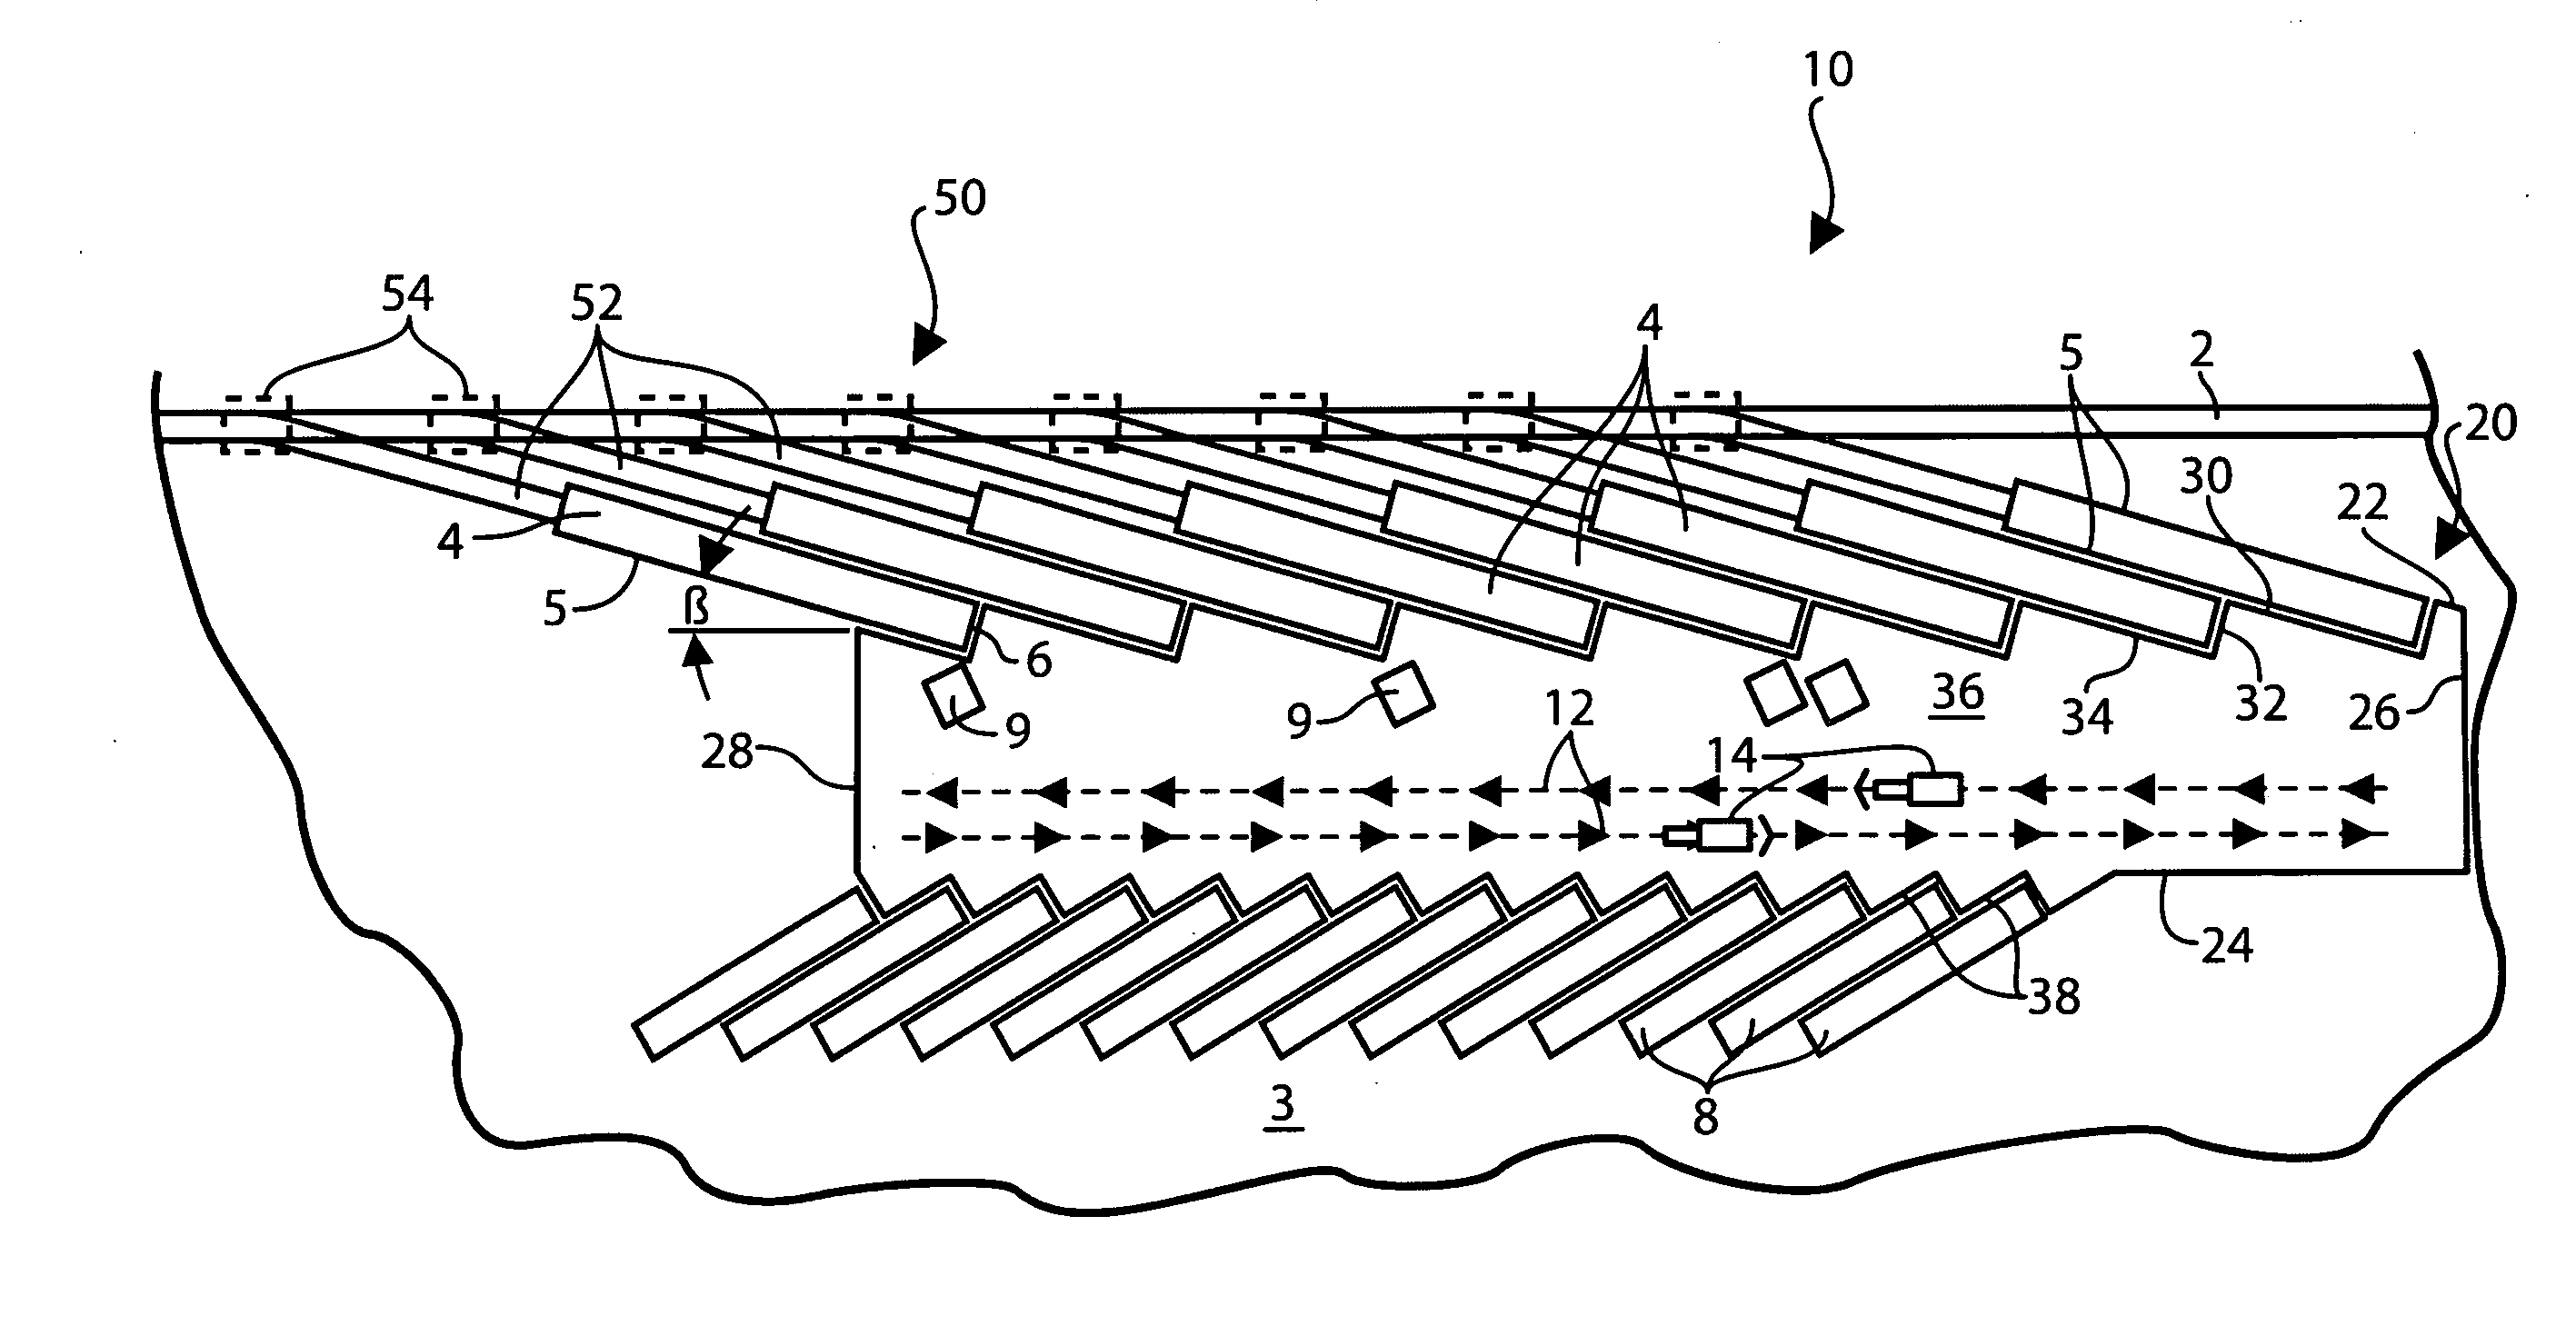 System, network and method for transporting cargo